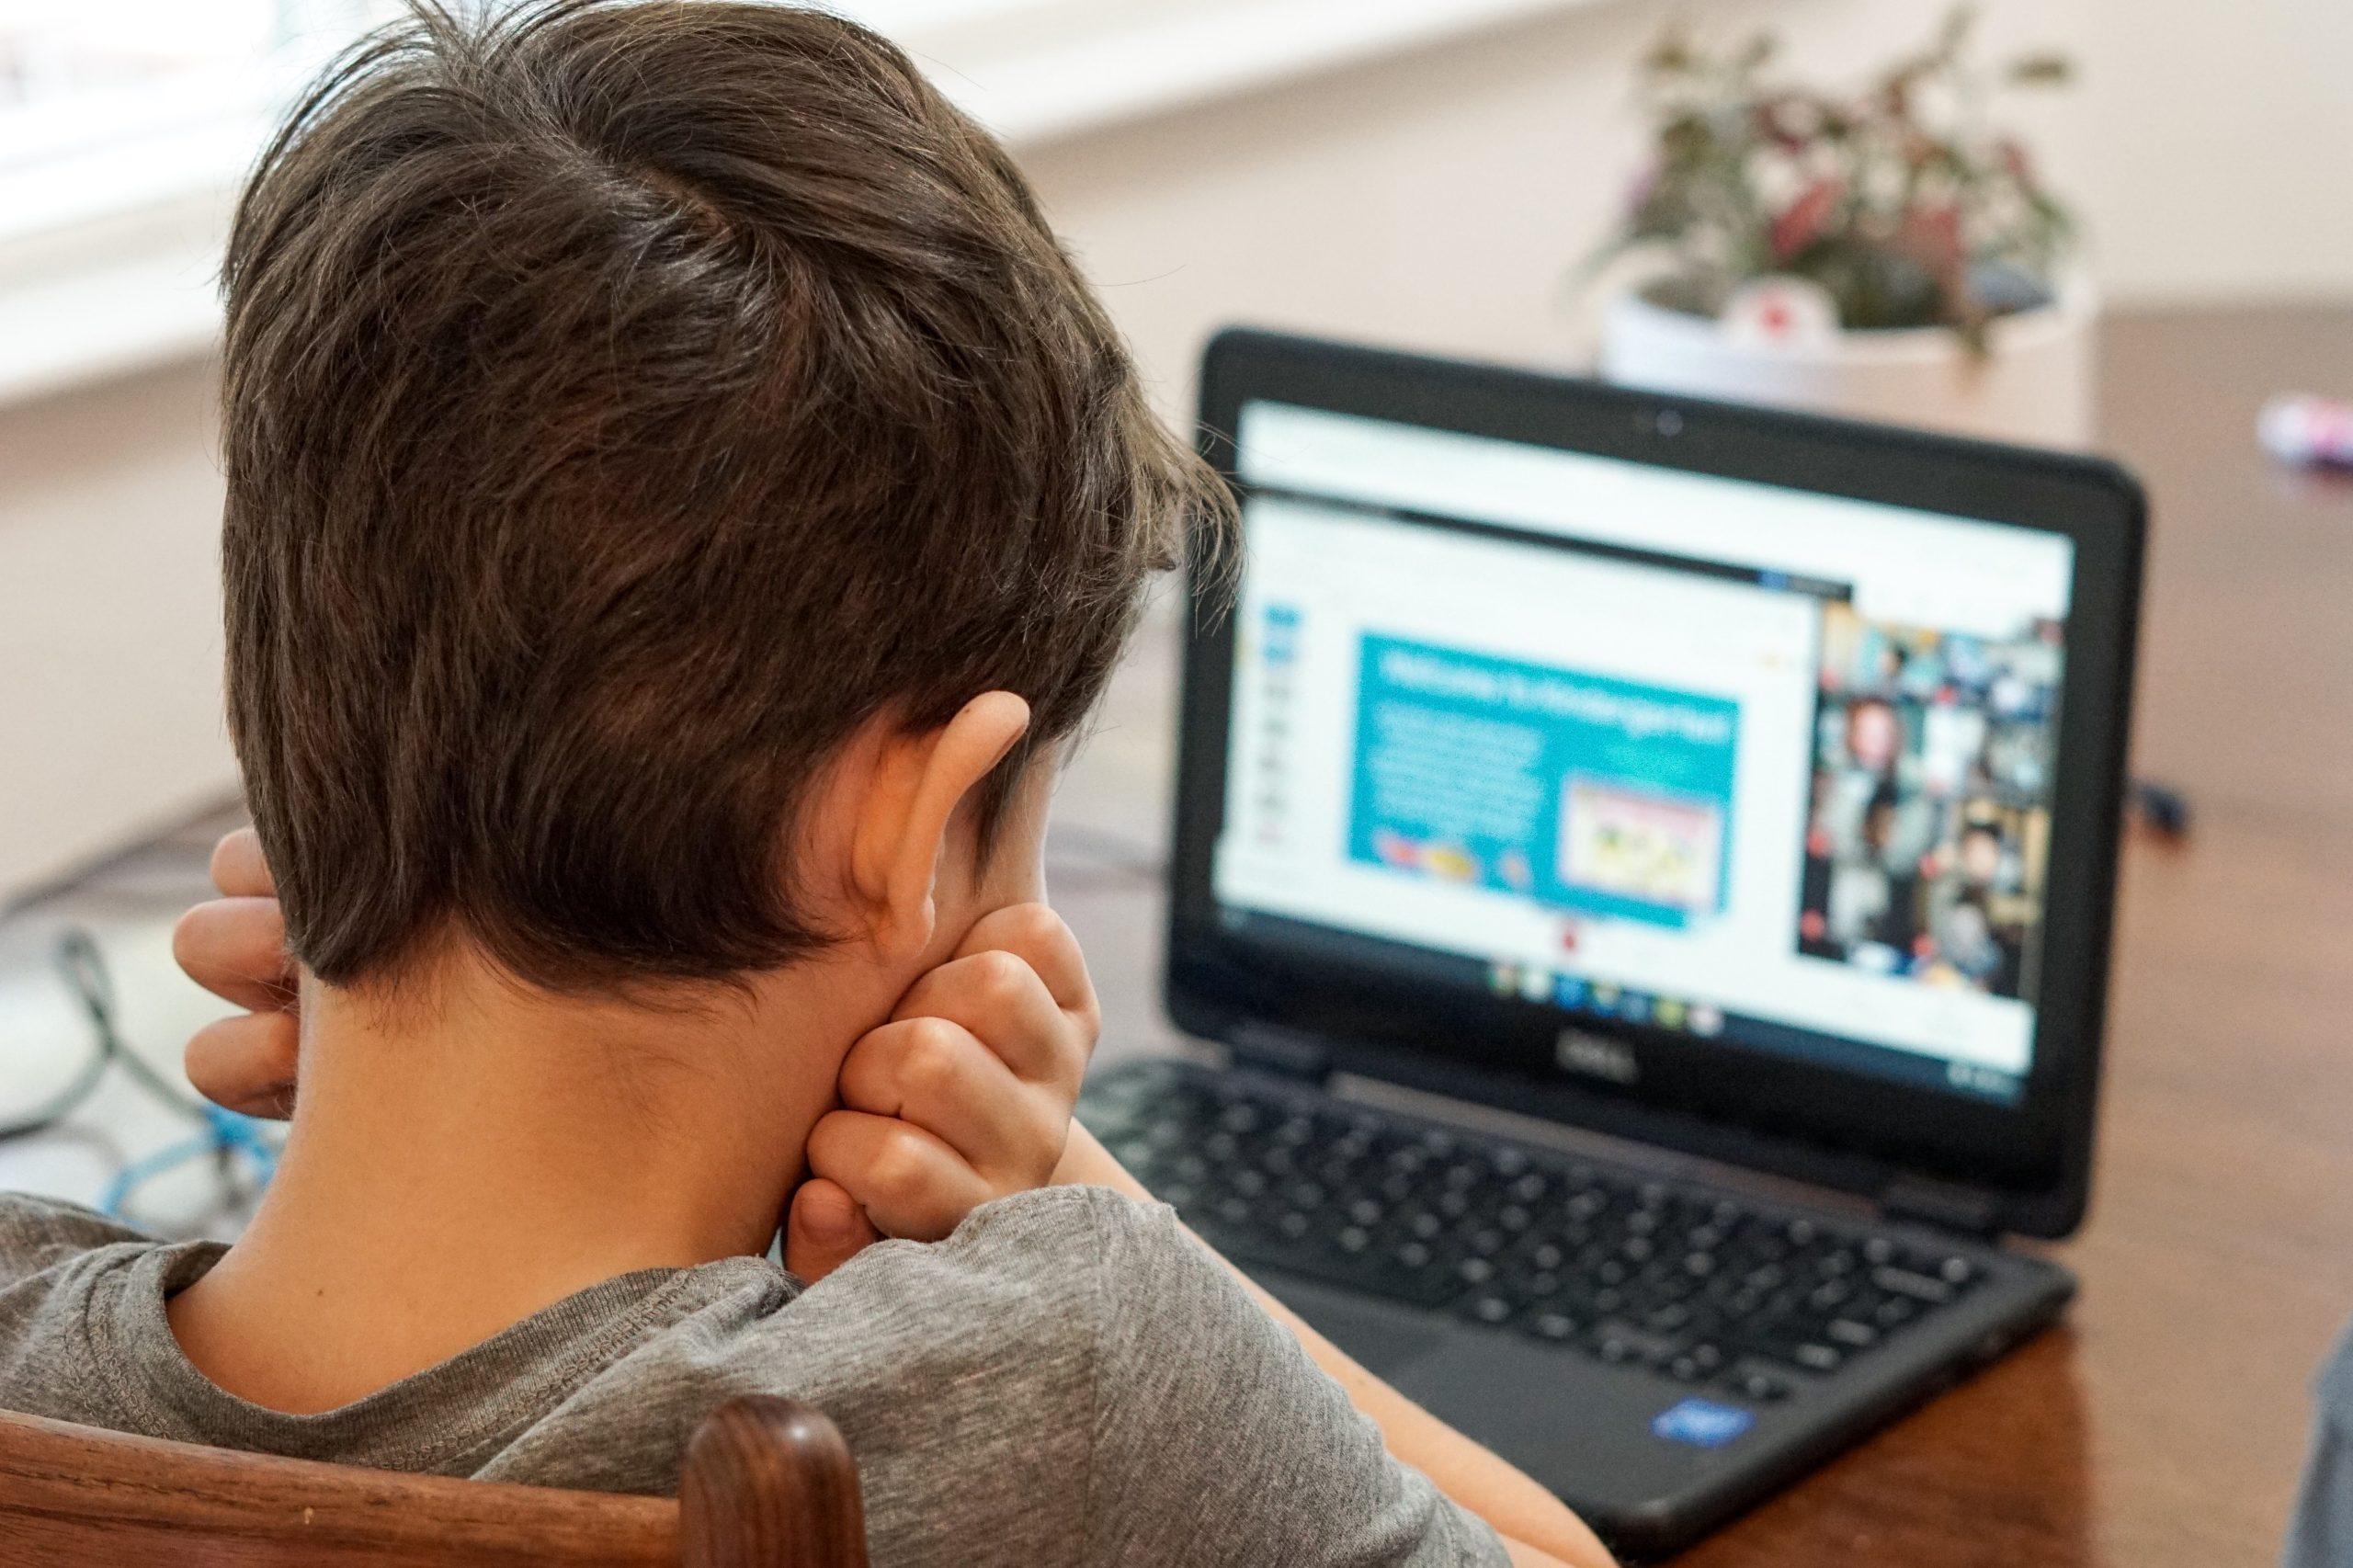 Internet and online safety tips for parents and kids